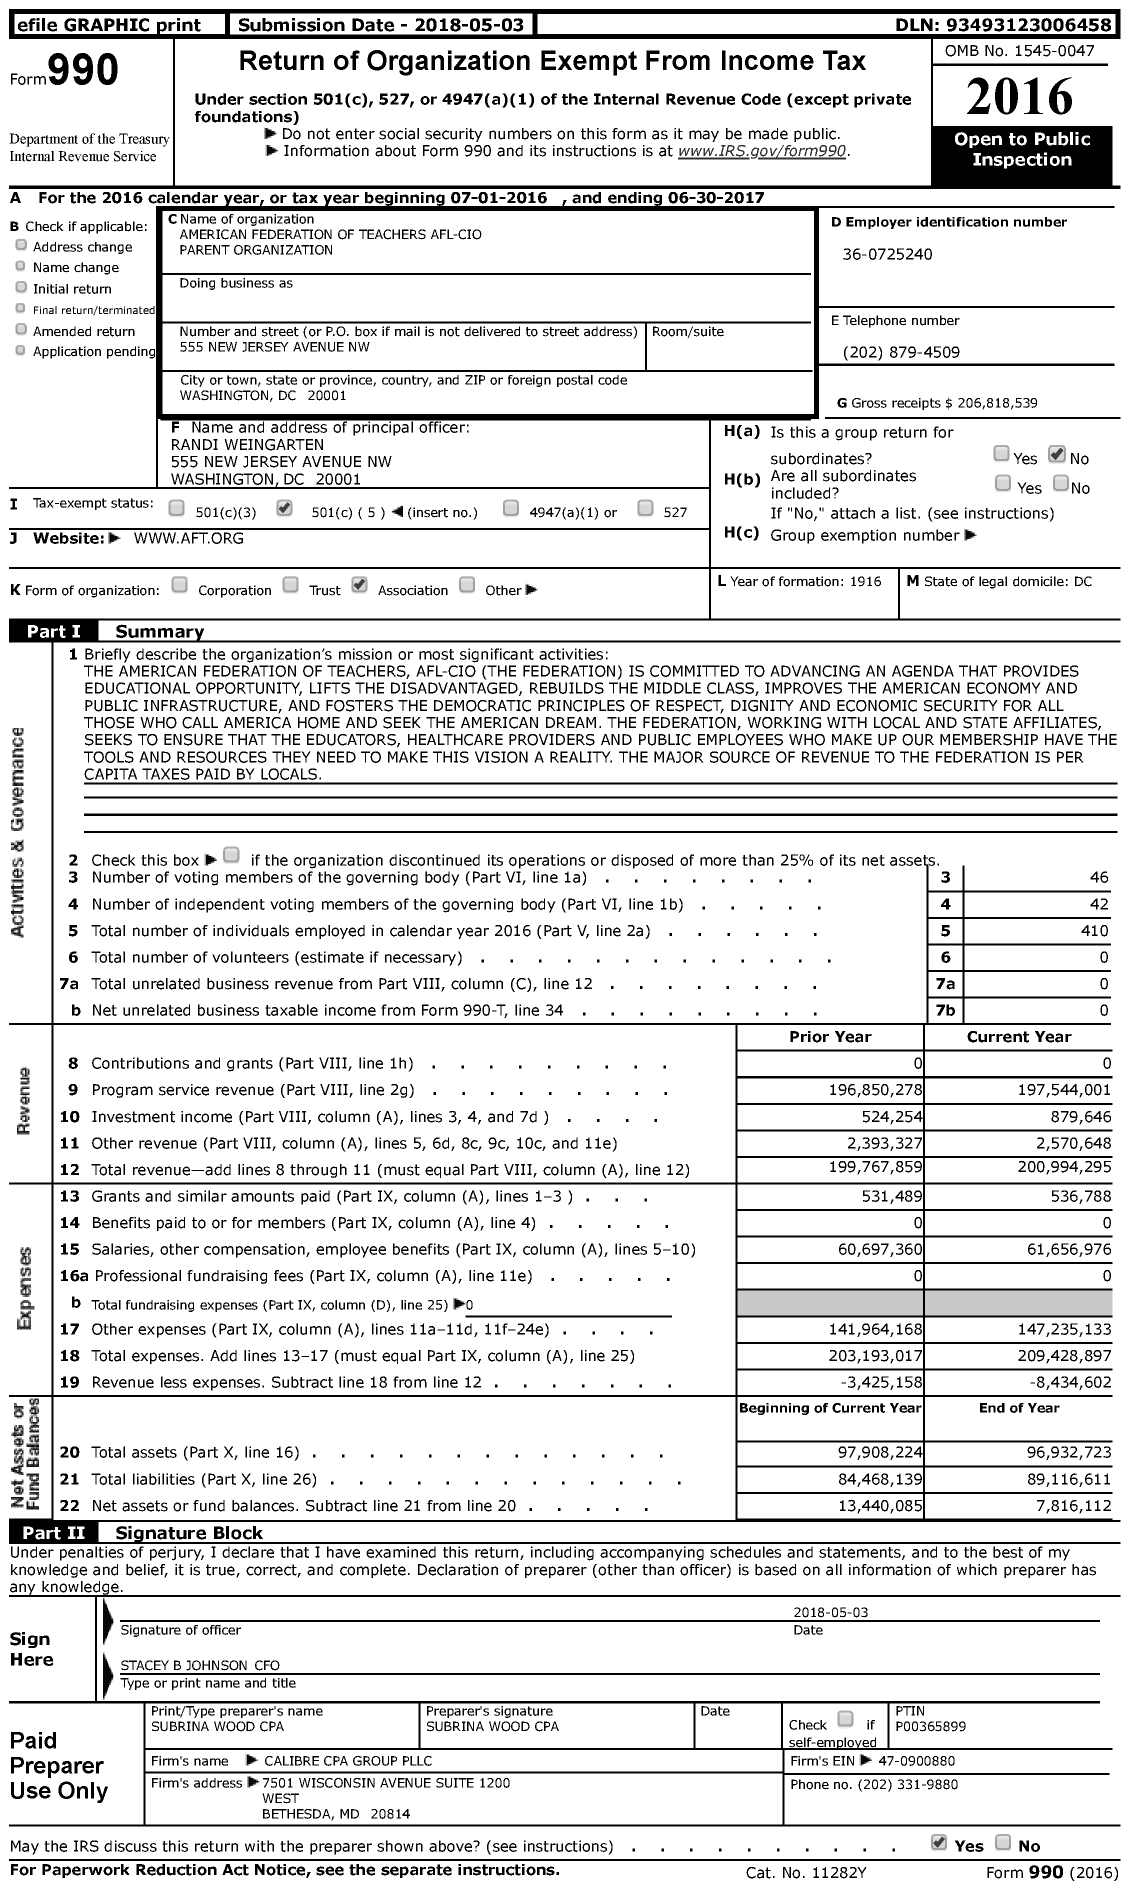 Image of first page of 2016 Form 990 for American Federation of Teachers - Parent Organization (AFT)